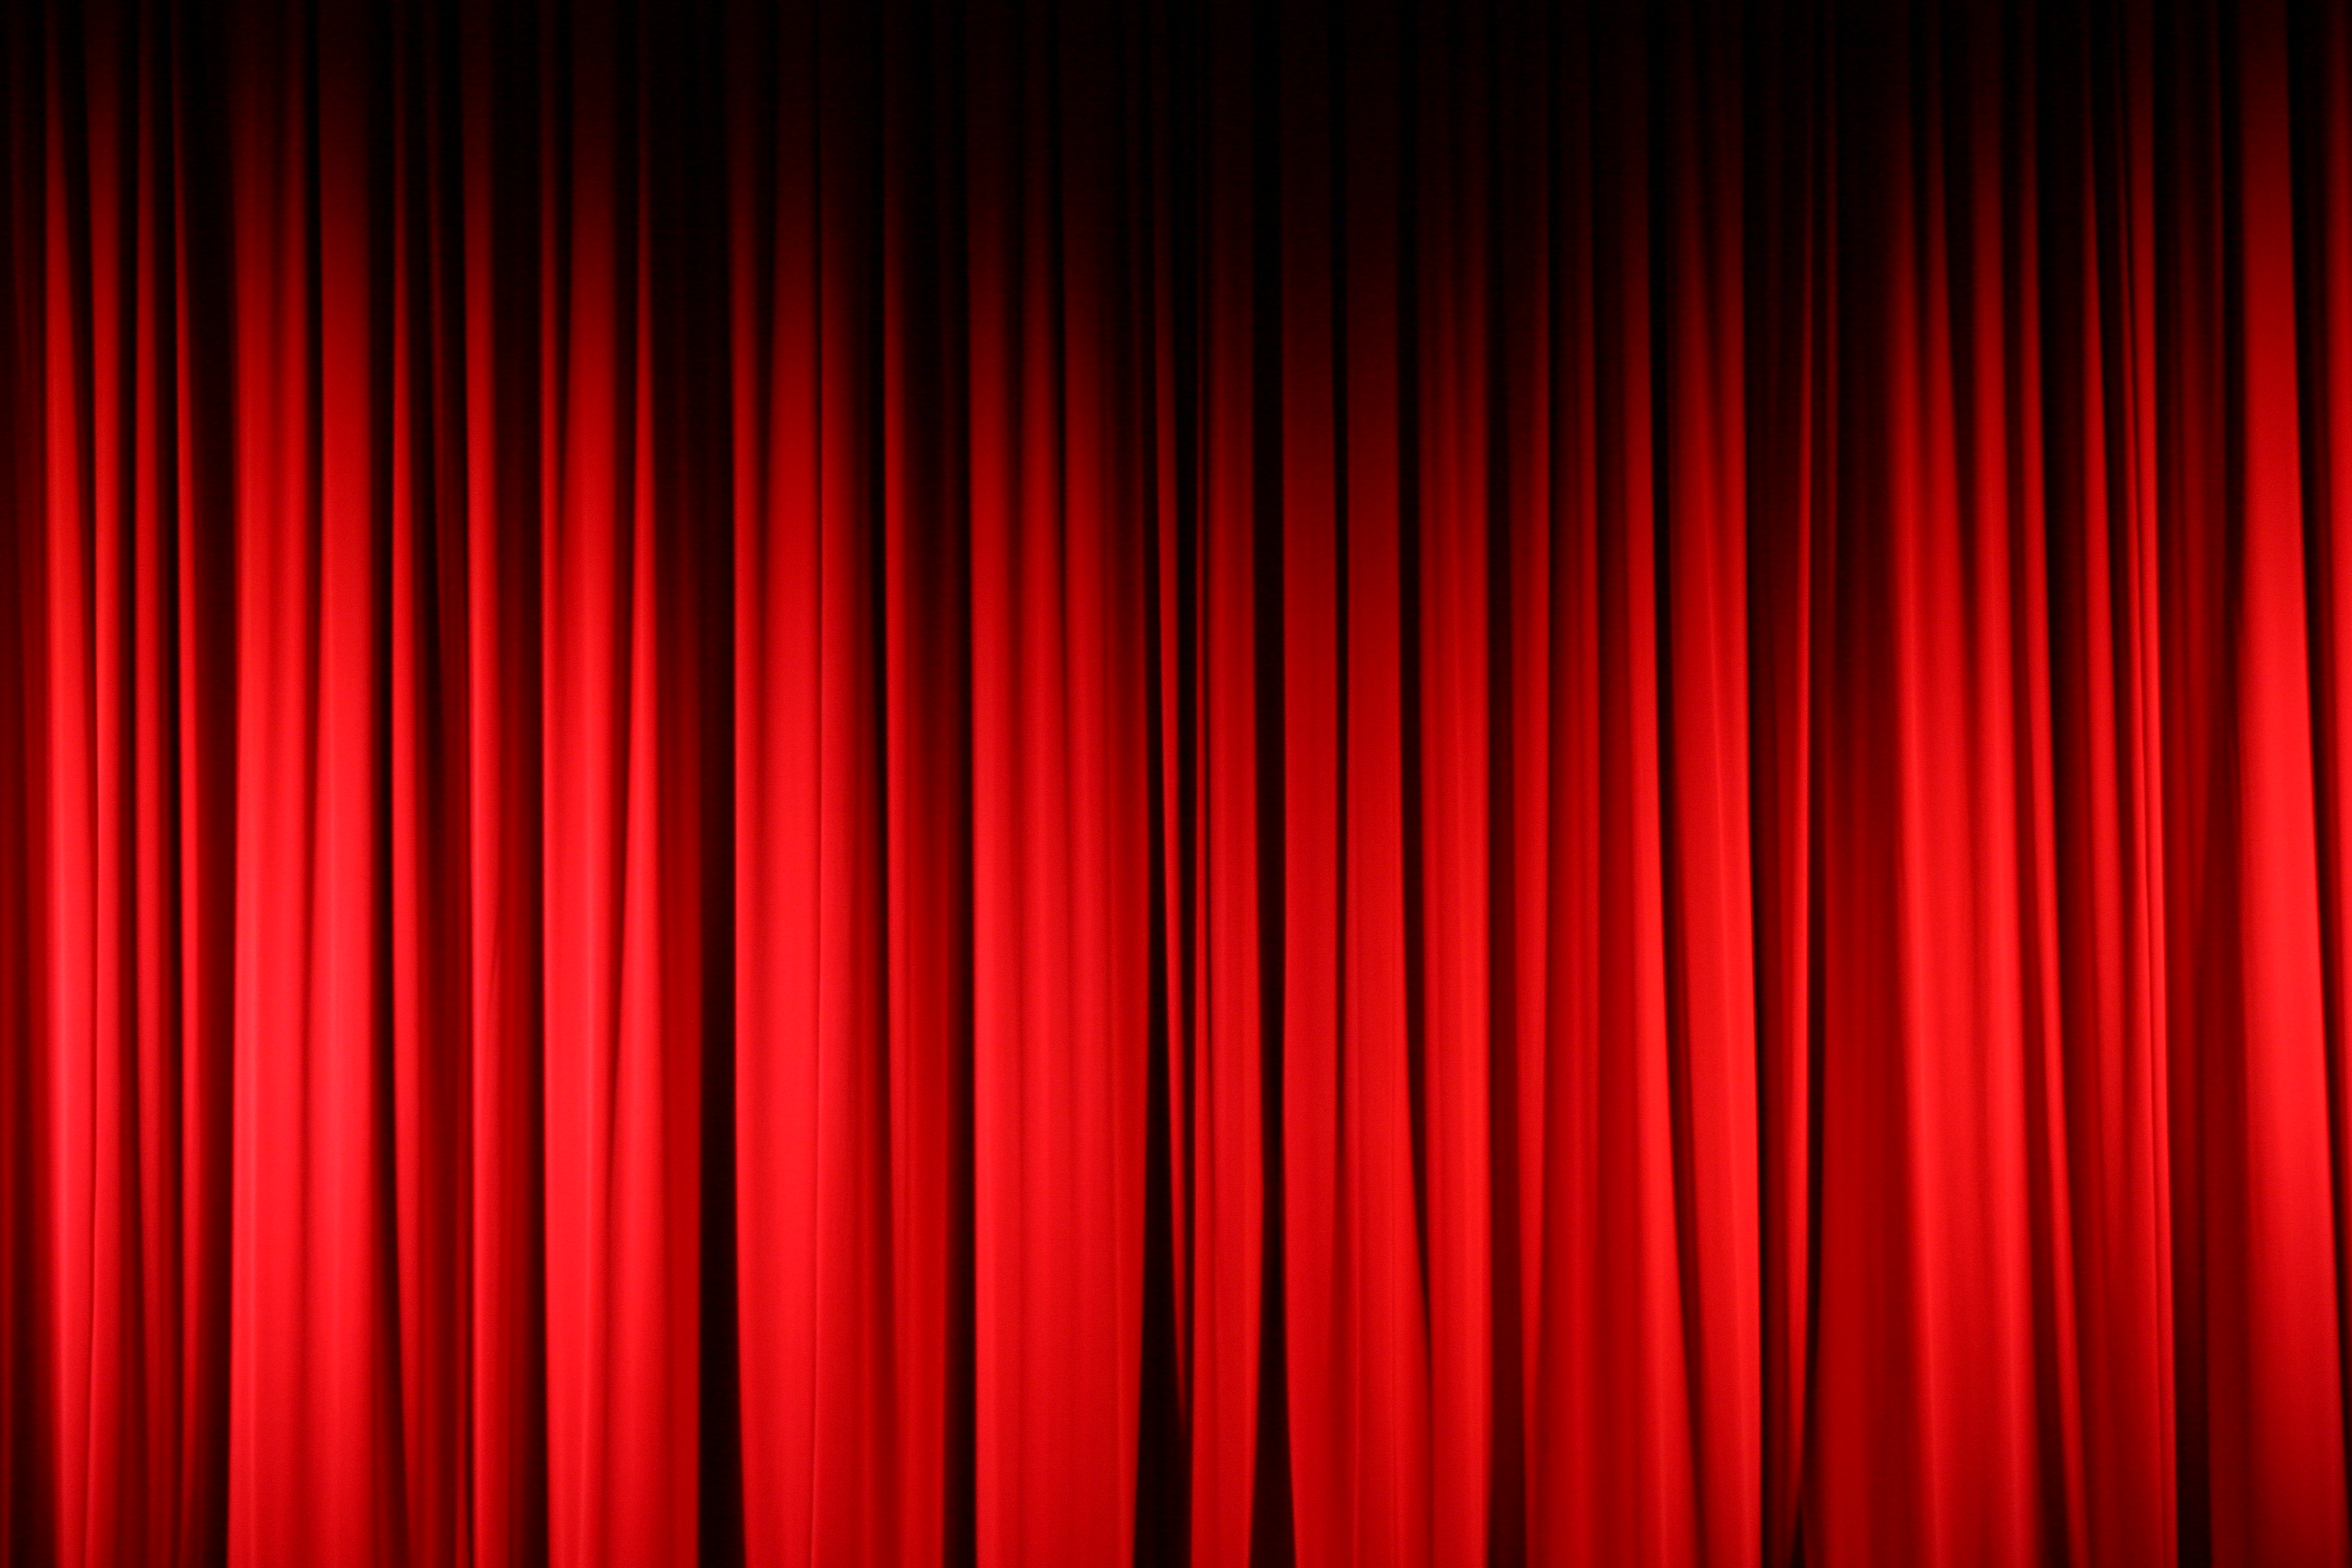 Just Red Curtains Clip Art.